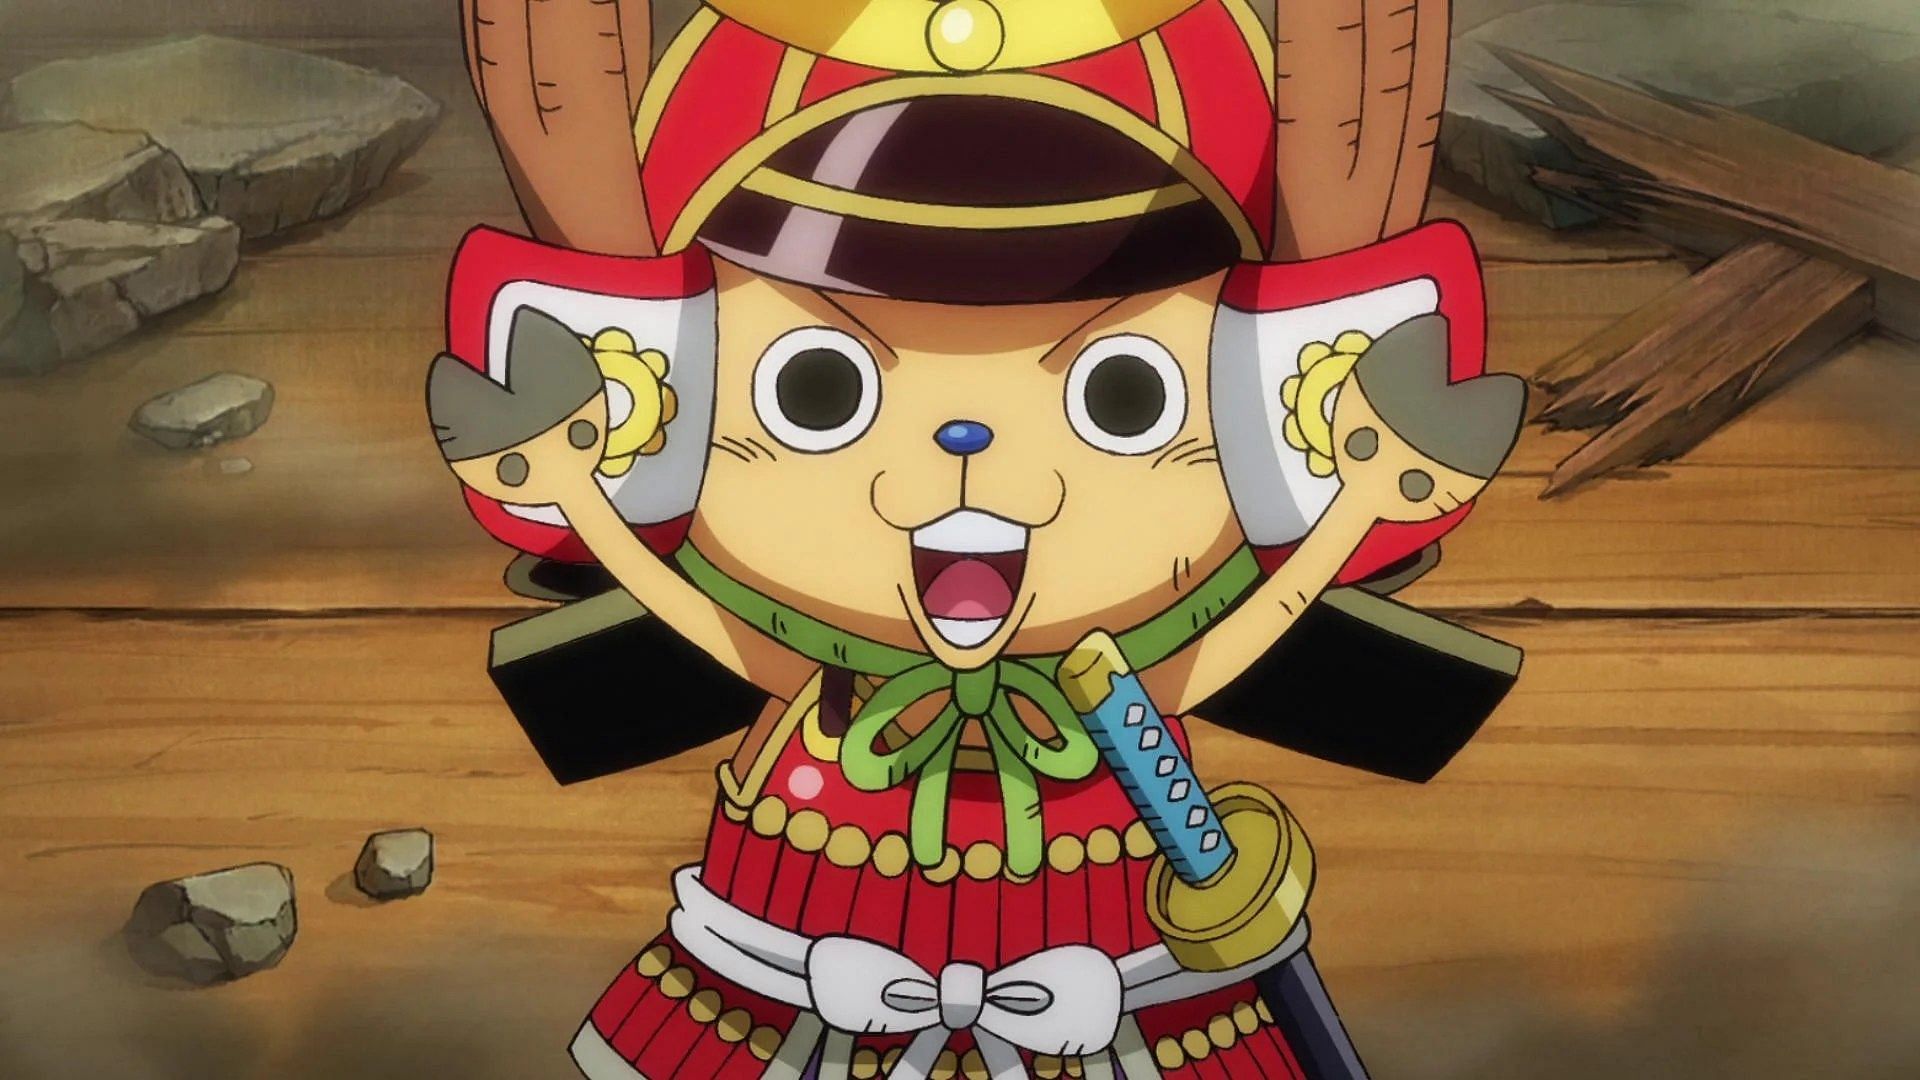 Chopper as seen in the anime series (Image via Toei Animation)